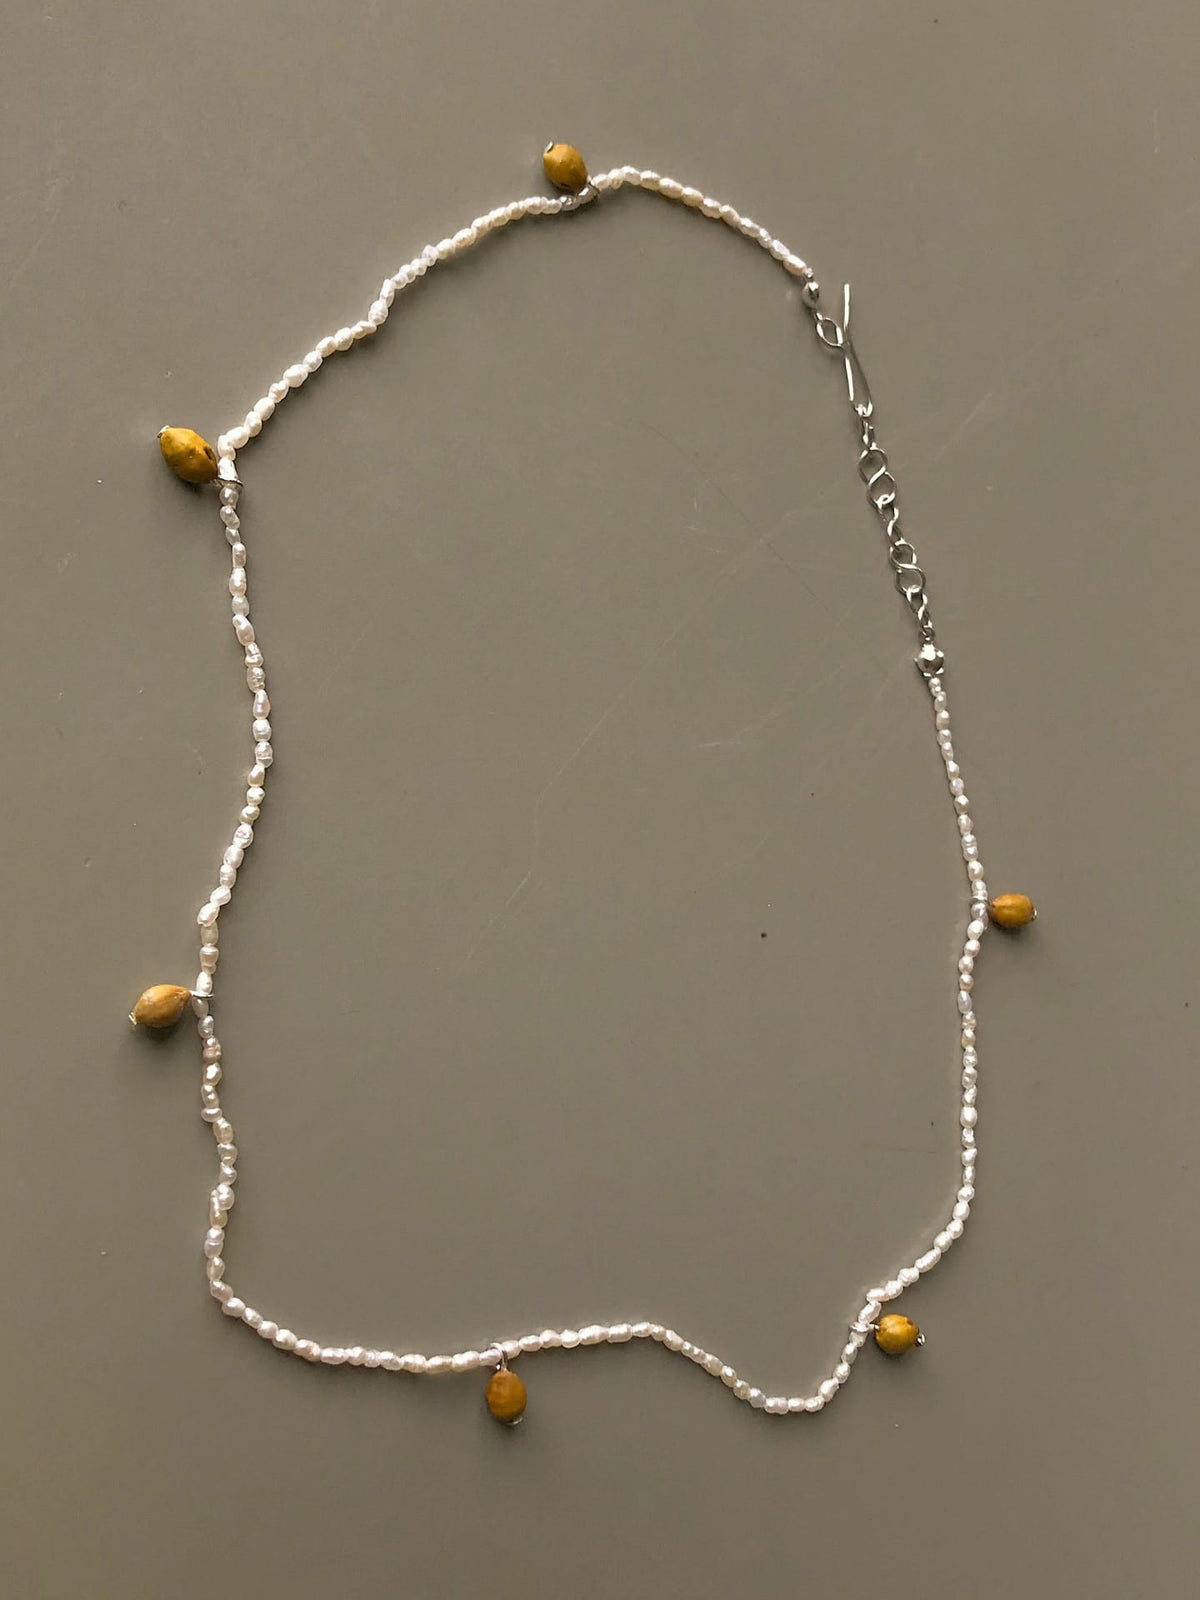 An Avara Studio Kōwhai Seed Pearl Necklace with yellow beads on it.